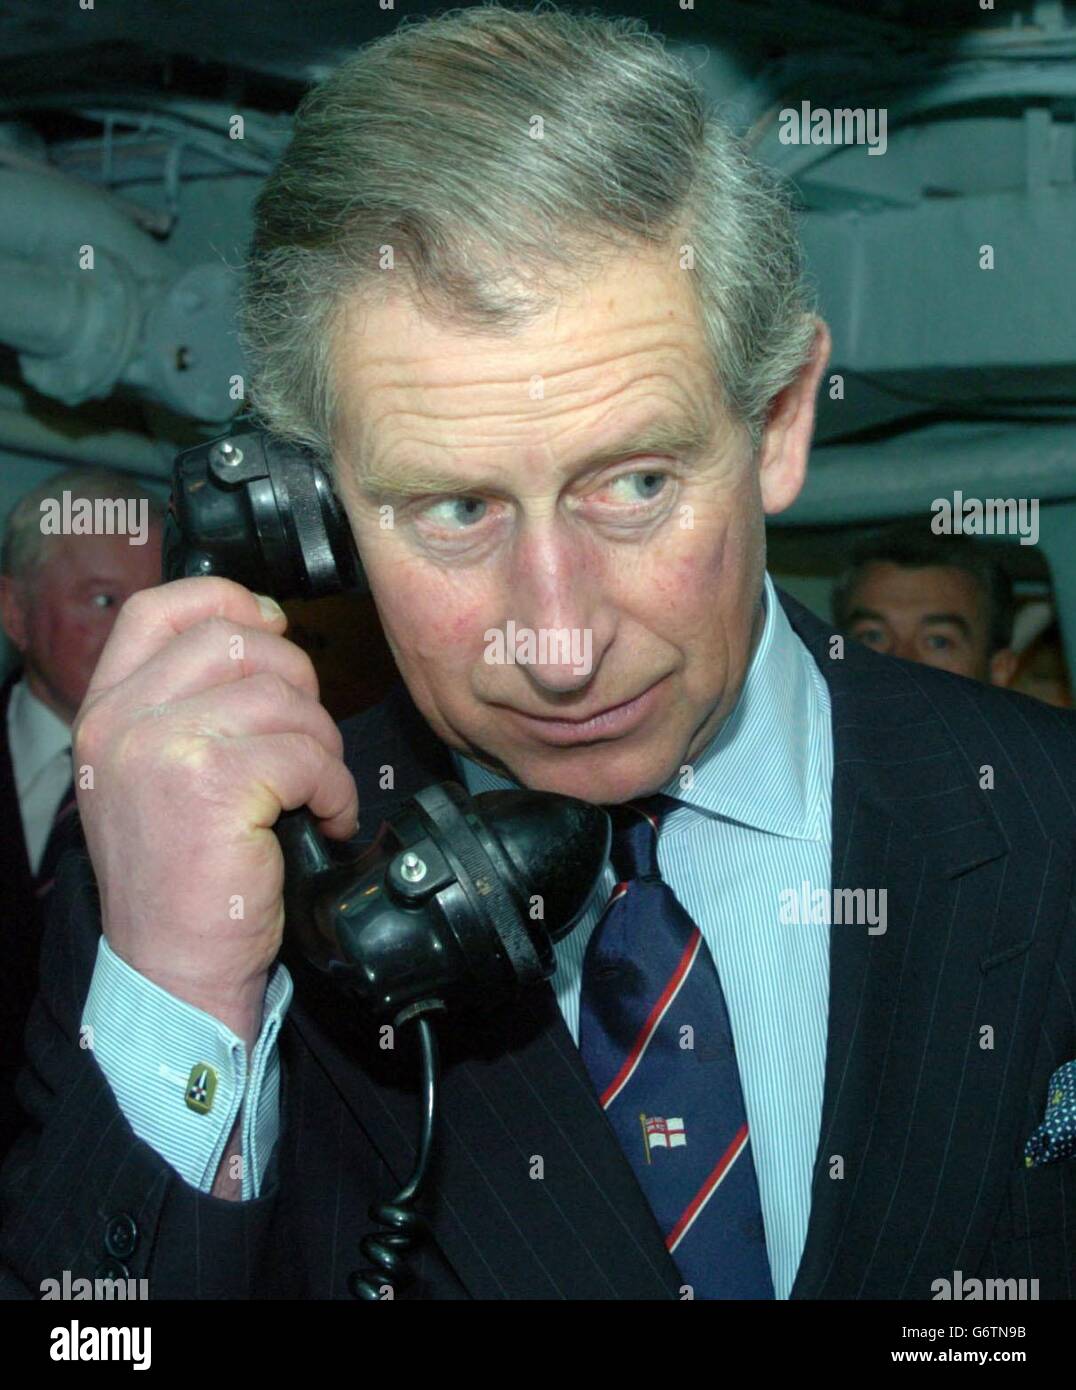 The Prince of Wales aboard HMS Belfast, using the ships telephone during his visit to the The White Ensign Association. The charity's headquarters are located onboard HMS Belfast which is moored on the south bank of the River Thames in London. The Association was founded by the Royal Navy and the City of London in 1958. Stock Photo